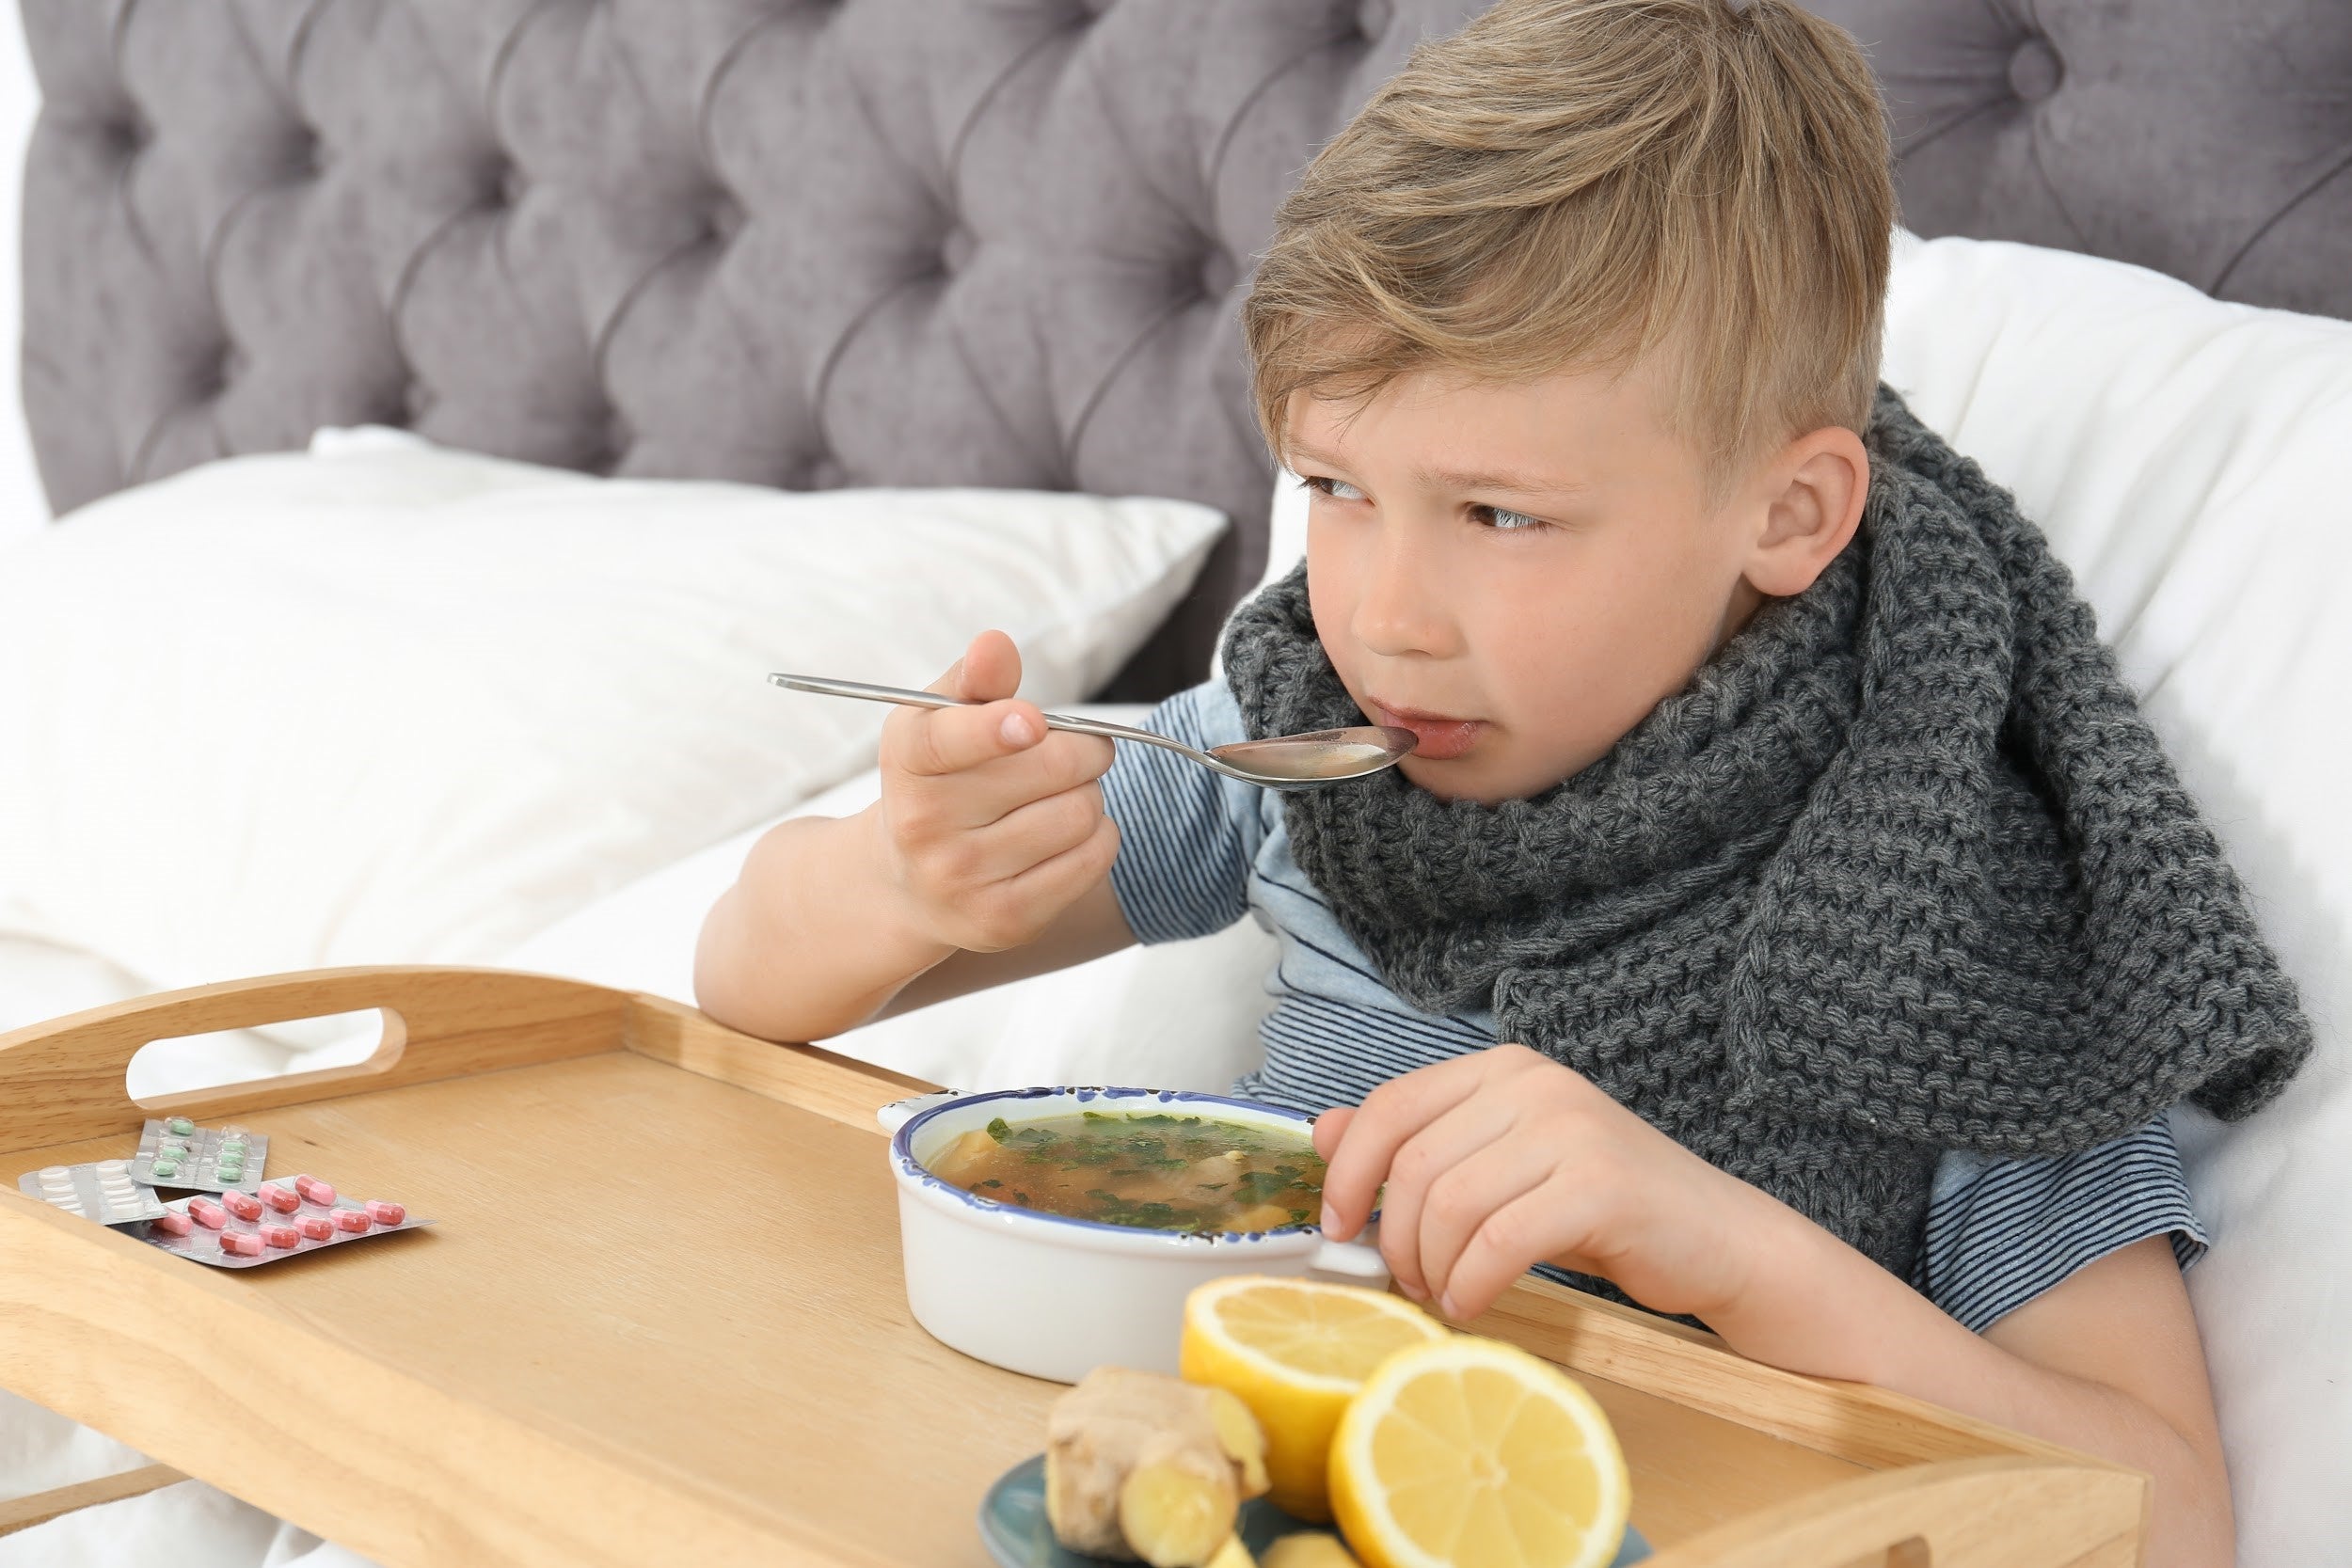 best foods for sick kids by illness - chicken noodle soup for cold and flu